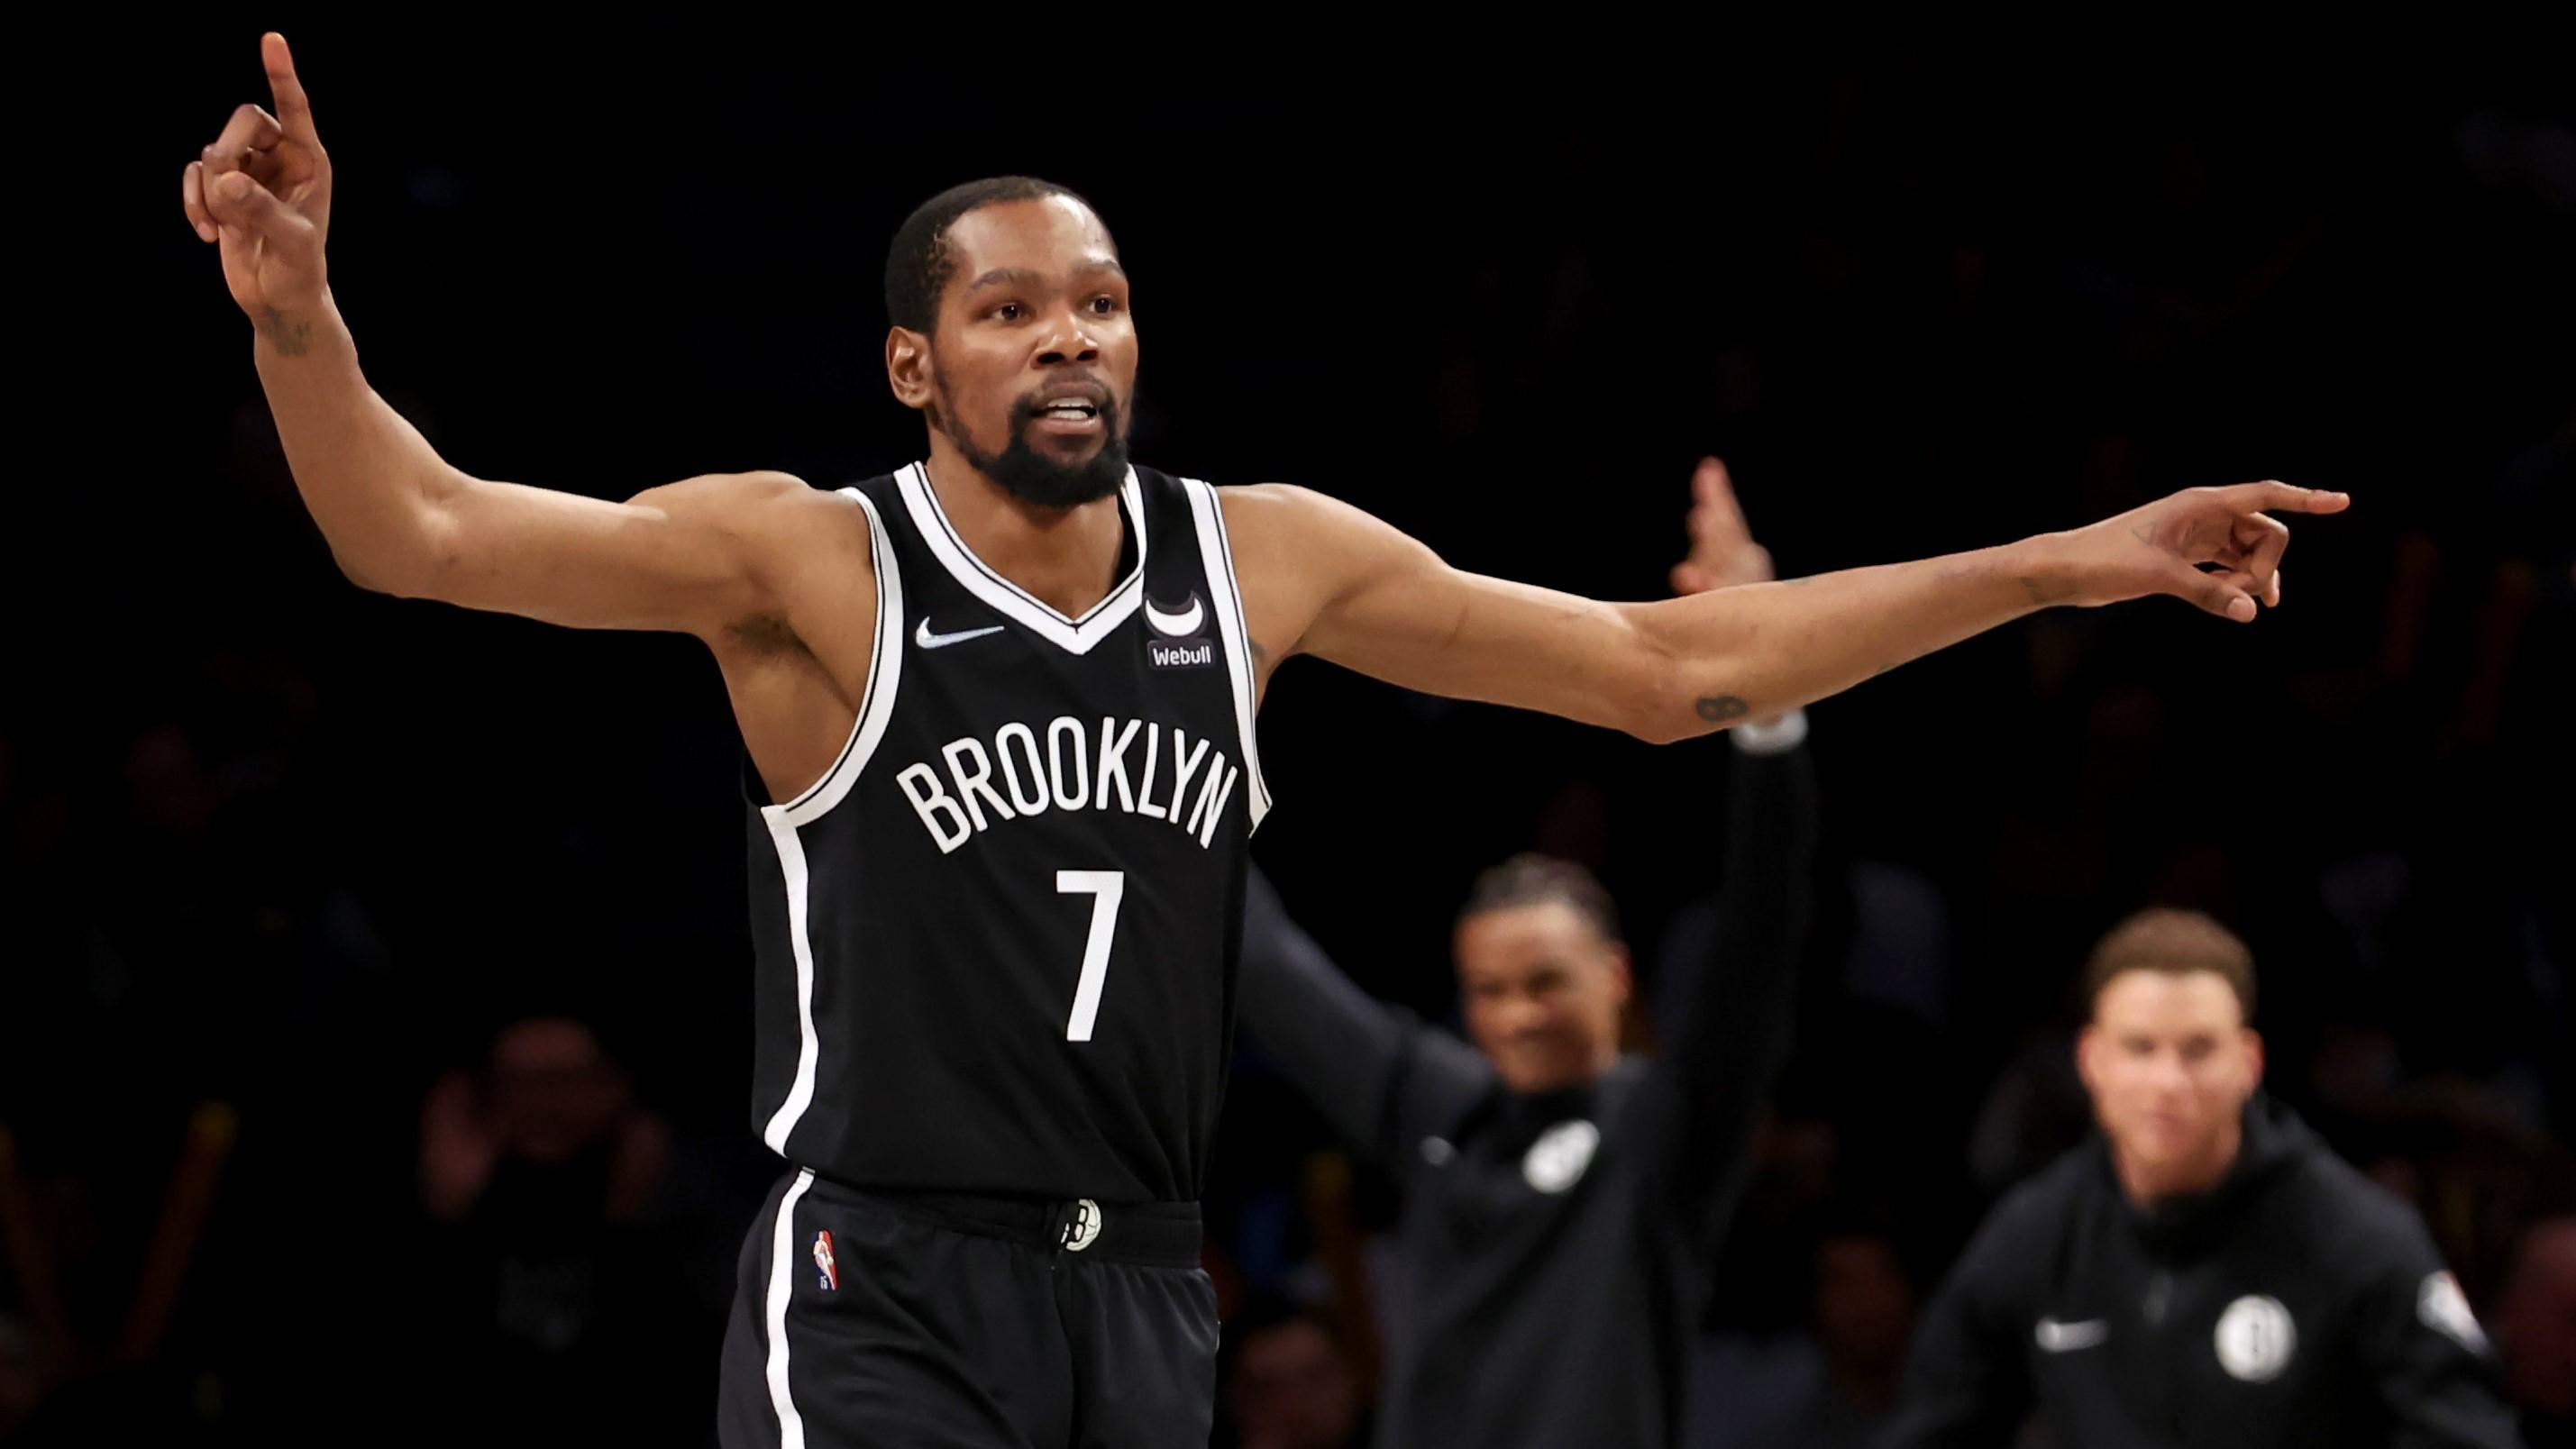 Mar 29, 2022; Brooklyn, New York, USA; Brooklyn Nets forward Kevin Durant (7) reacts during the third quarter against the Detroit Pistons at Barclays Center. The Nets defeated the Pistons 130-123. Mandatory Credit: Brad Penner-USA TODAY Sports / Brad Penner-USA TODAY Sports